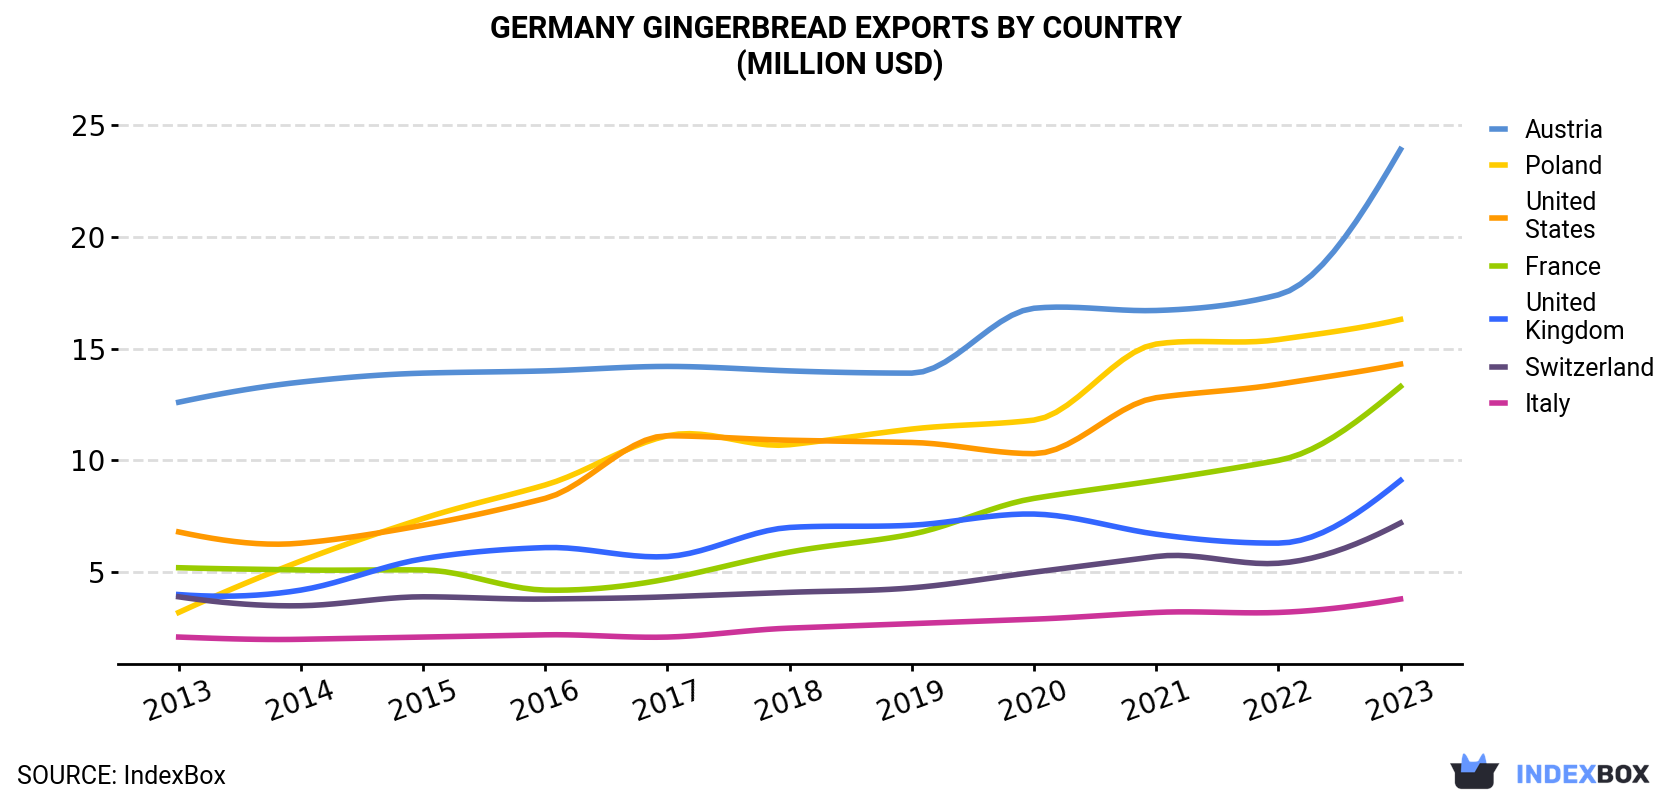 Germany Gingerbread Exports By Country (Million USD)